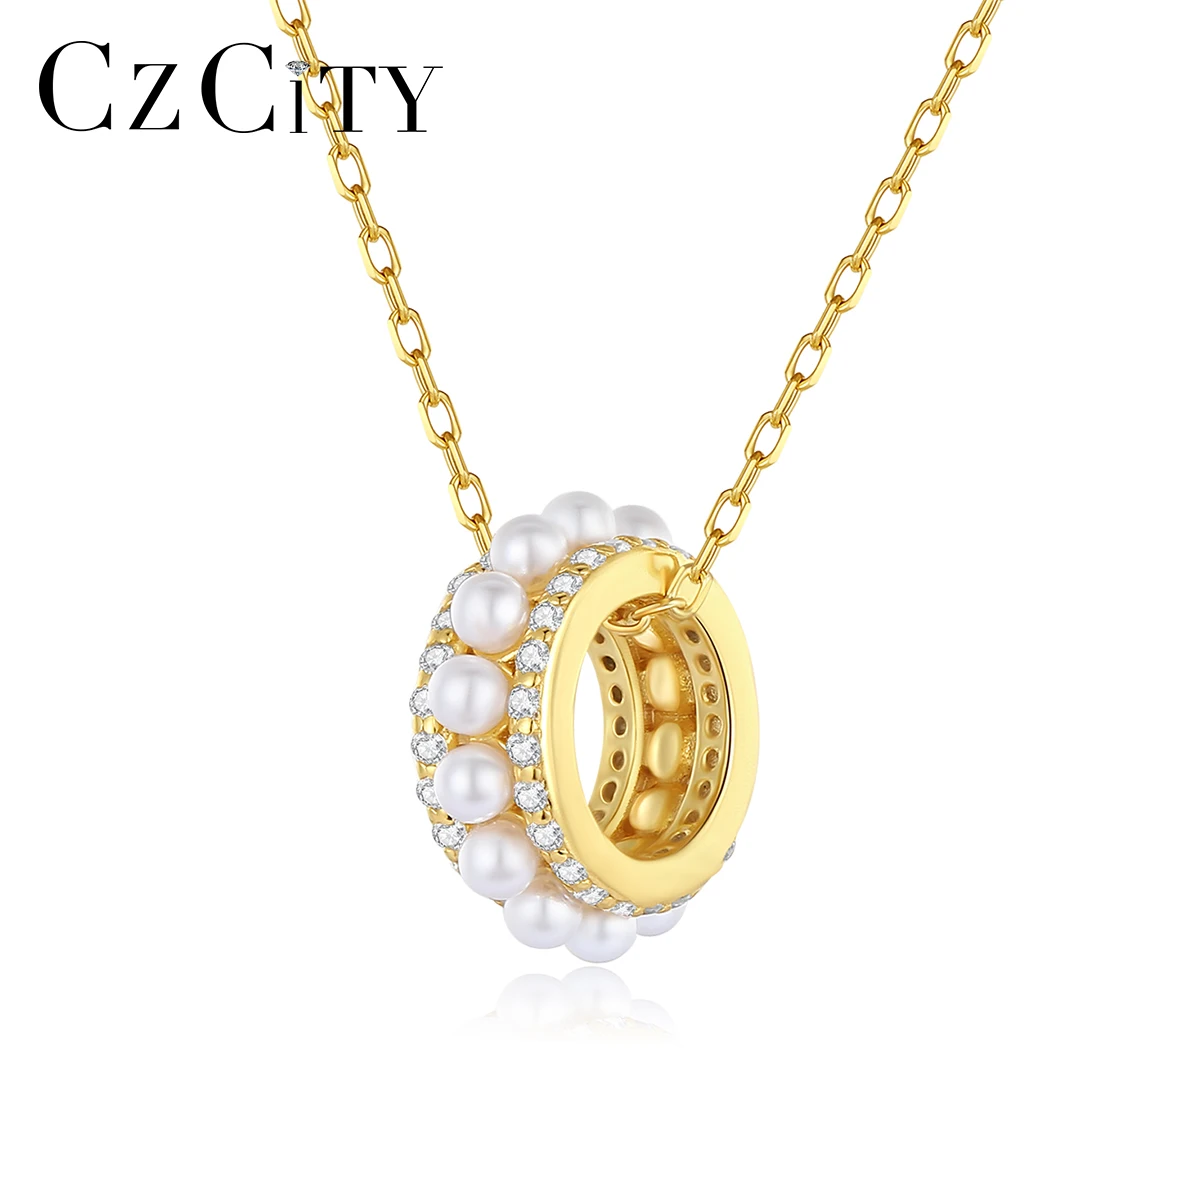 

CZCITY Silver 925 Cubic Zirconia Necklace Sterling Chain Charm Dainty Pendant Pearl Fine Jewelry Necklace